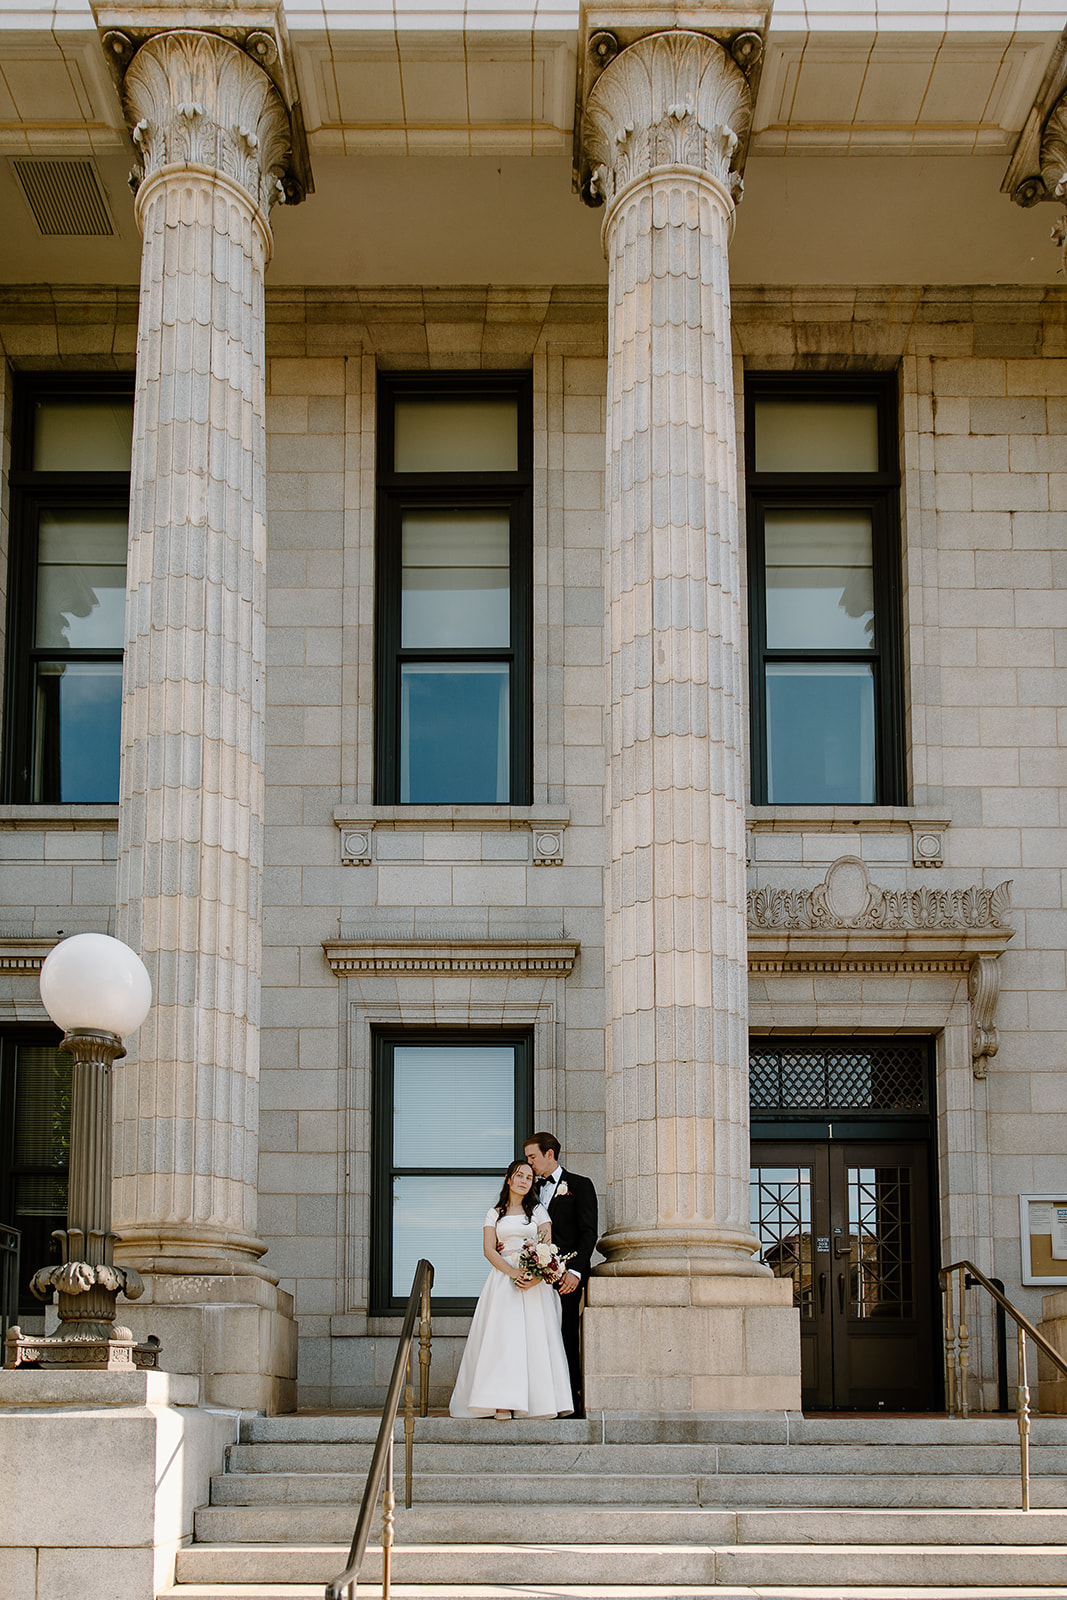 Courthouse wedding photos near The Graham Mill in North Carolina by Raleigh Wedding Photographers and Videographers